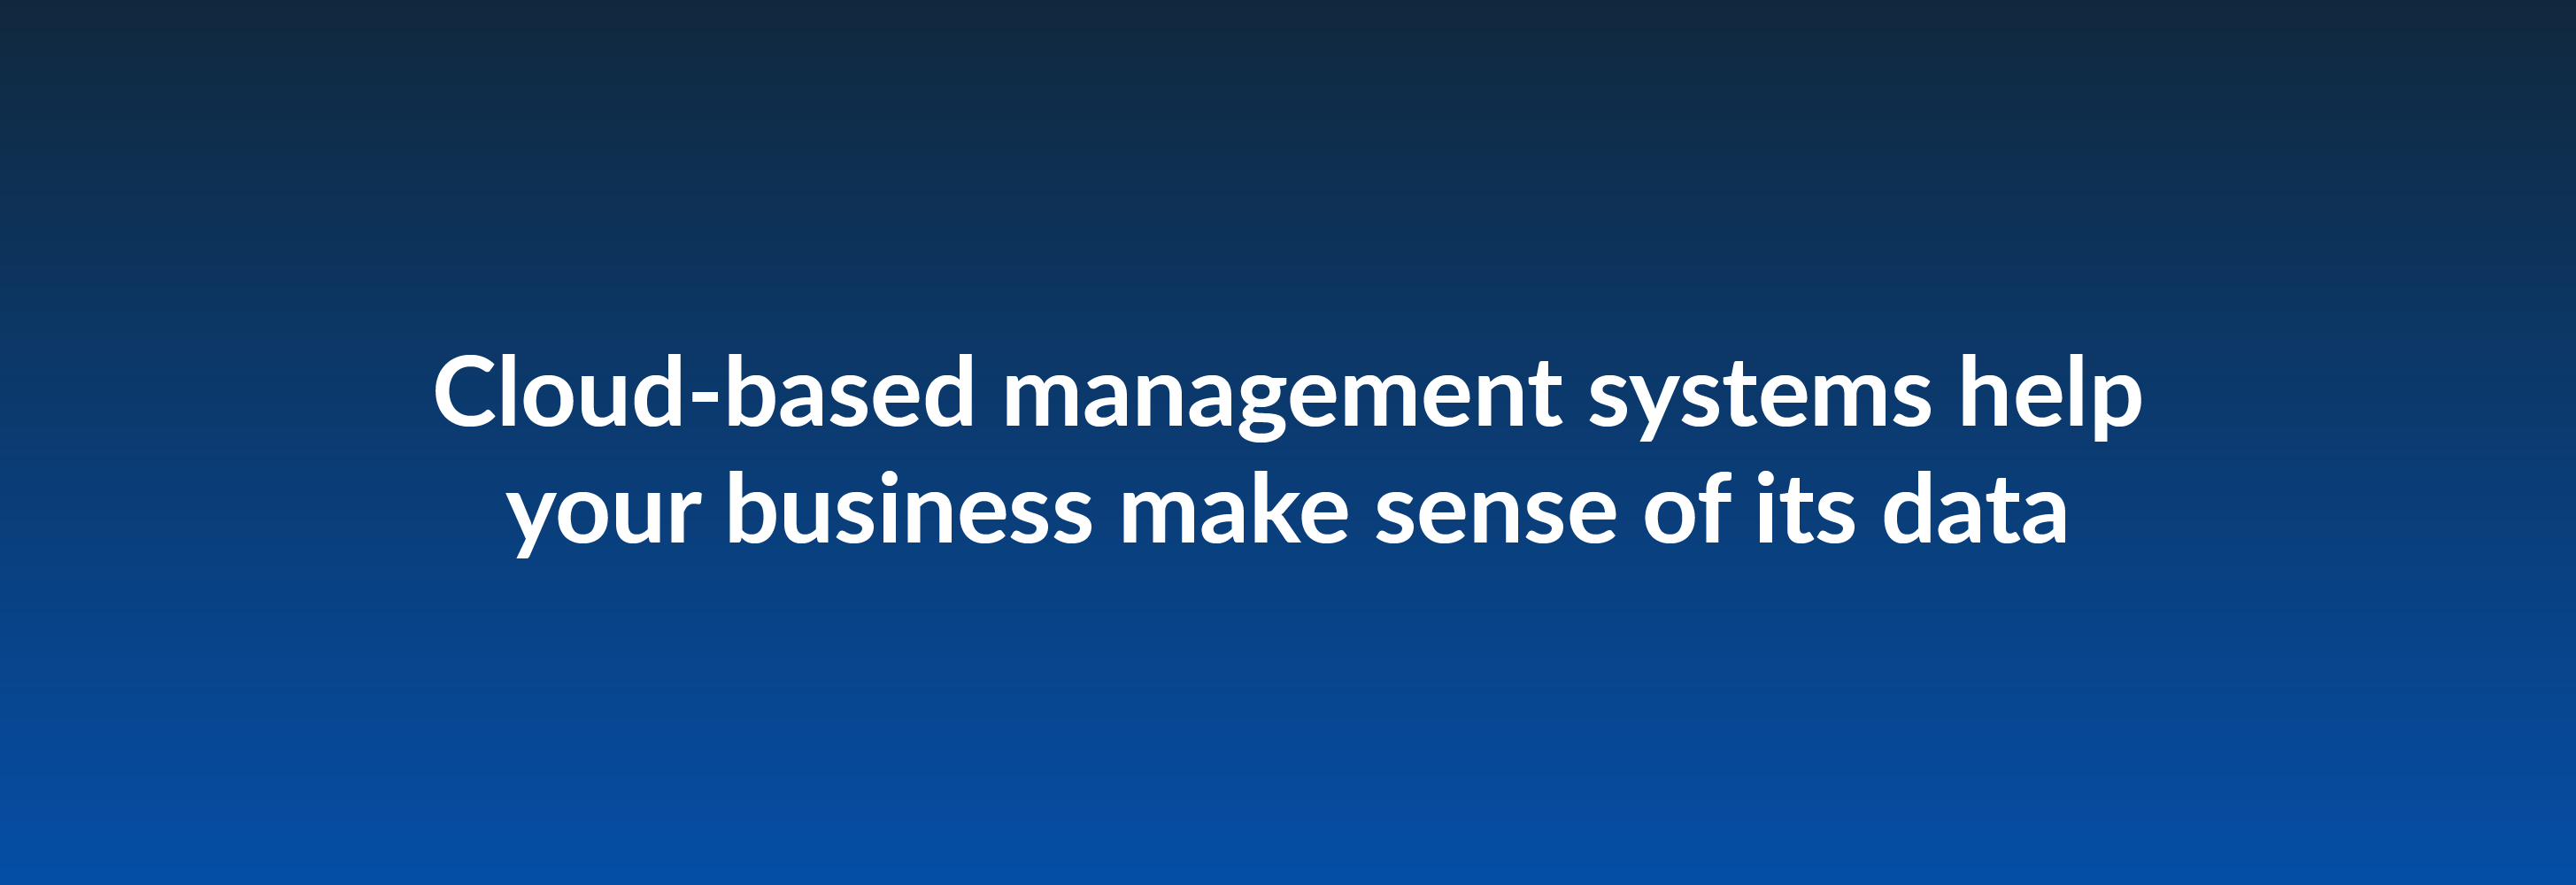 Cloud based management systems help your business make sense of its data